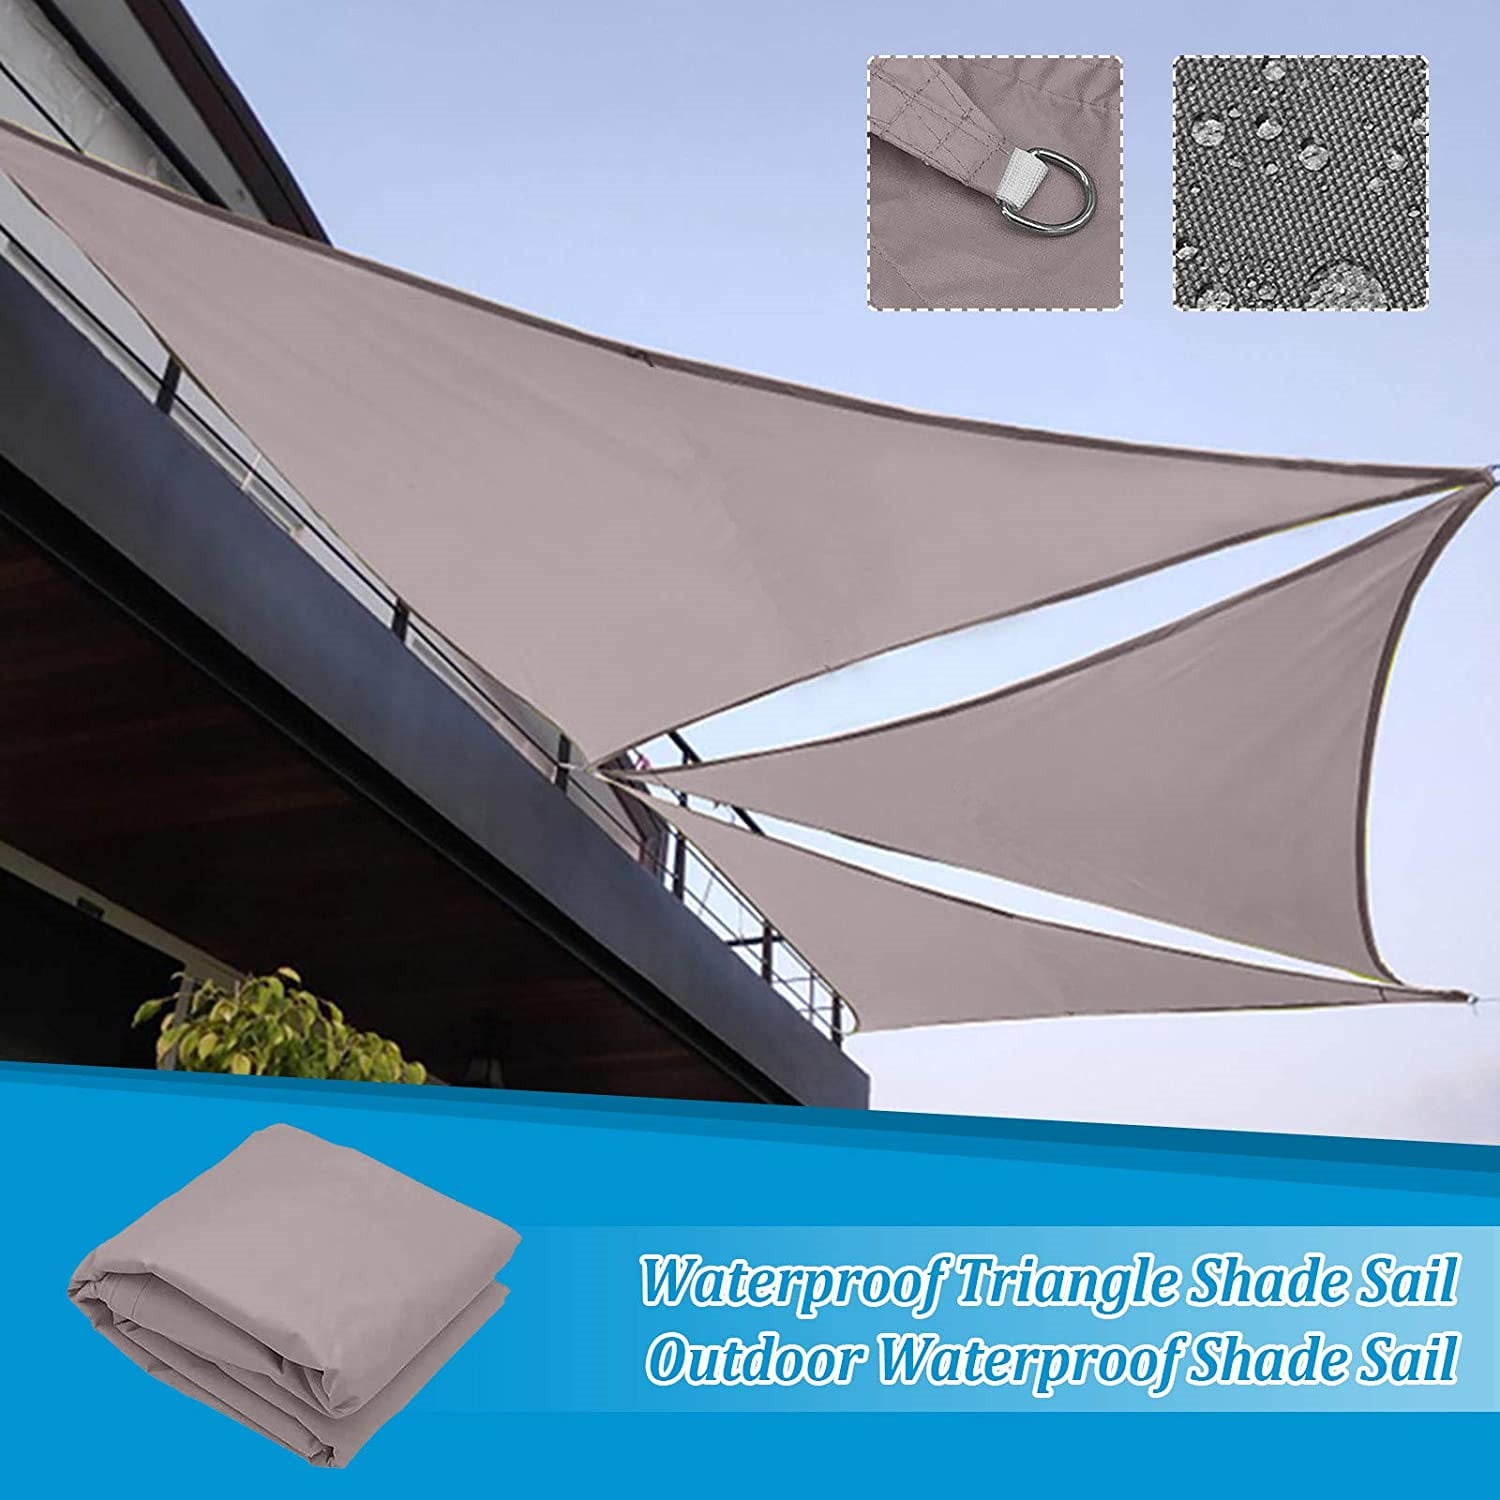 Details about   For Outdoor Patio Garden Backyard Lawn Sun Shade UV Resistant Net Shading Block 